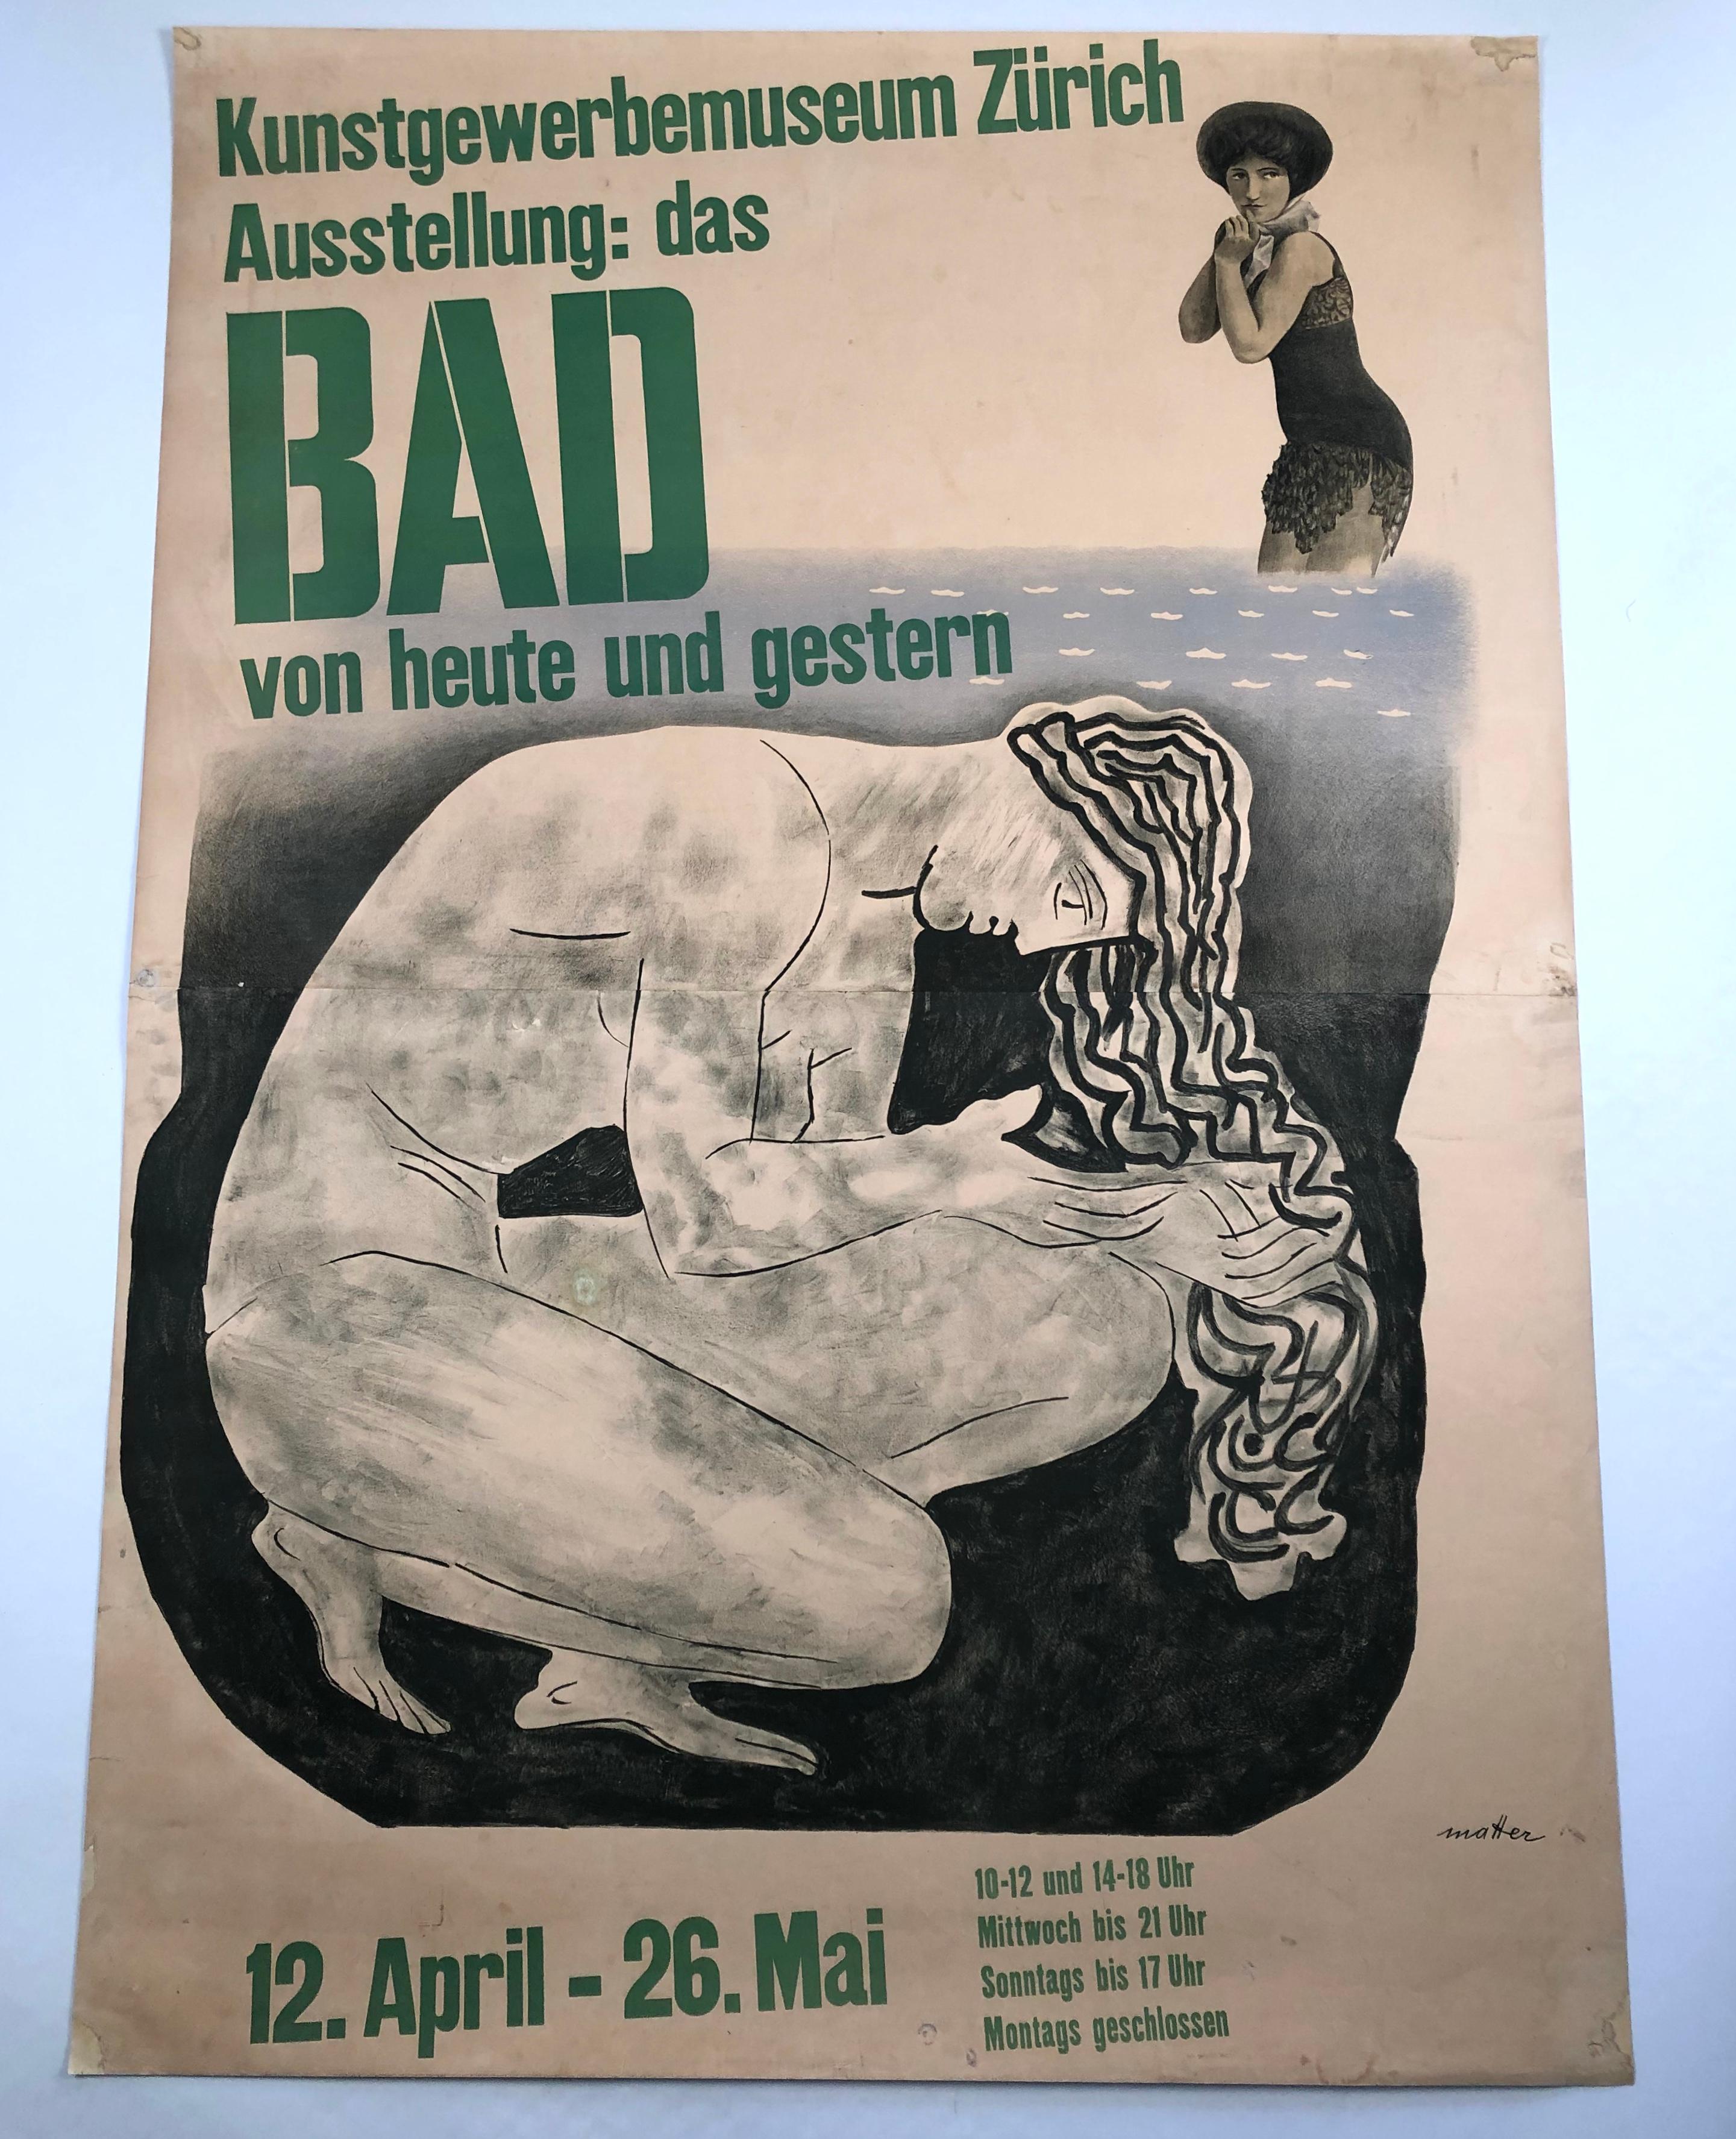 A large, original vintage Swiss exhibition poster by celebrated graphic designer, Herbert Matter, for an exhibition at the Museum of Art & Craft in Zurich, entitled (translated to English): The History of Bathing: From Yesterday to Today.
This